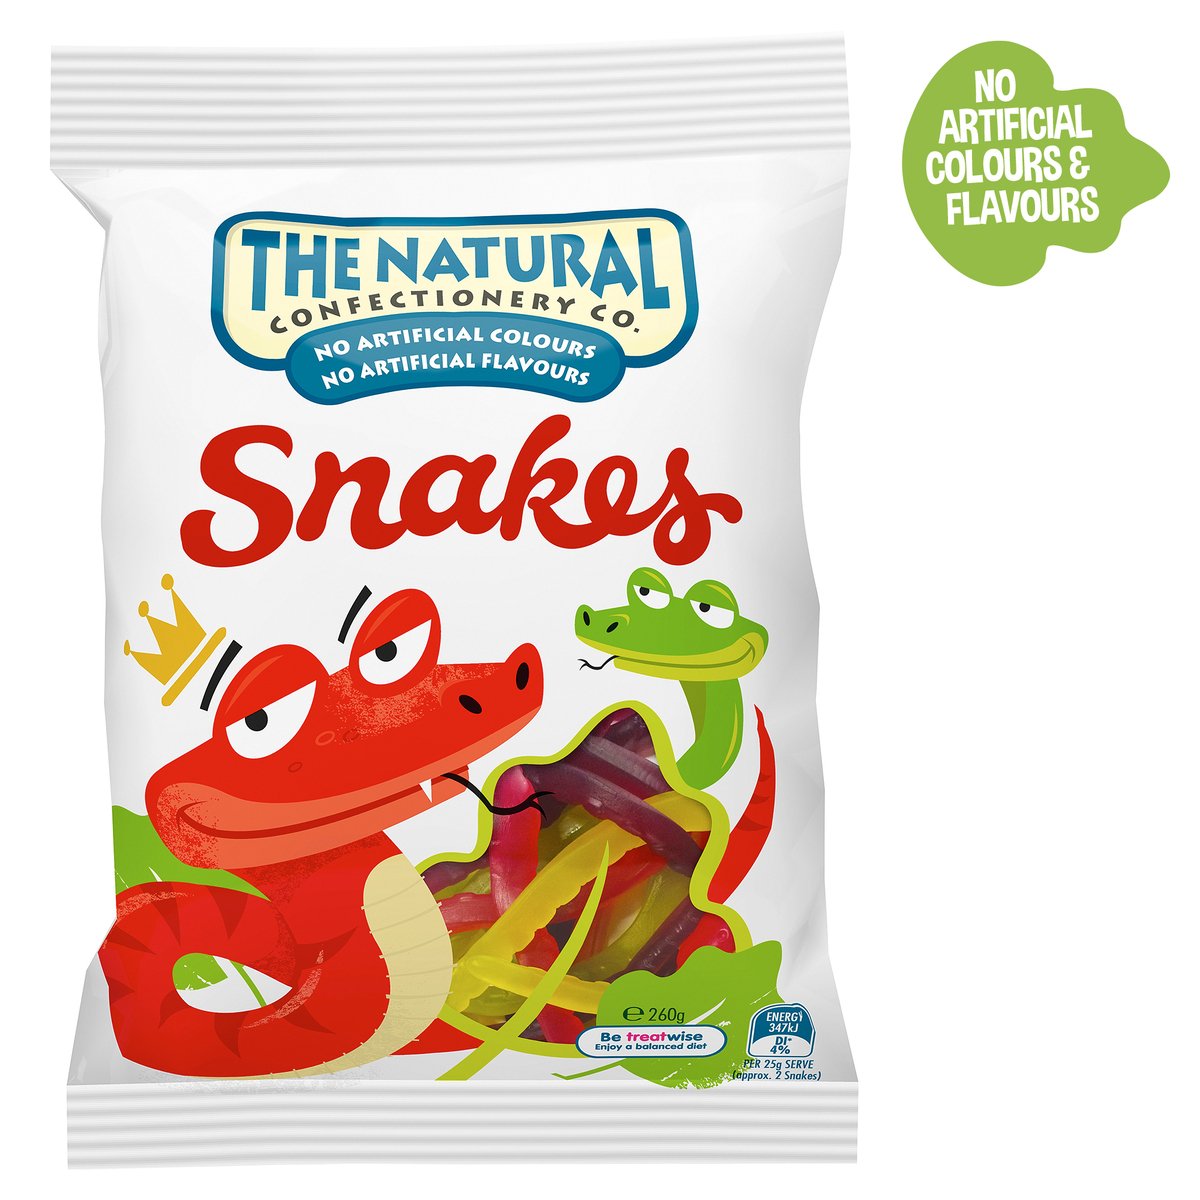 The Natural Confectionary Co. Snakes Jelly Candy 260g